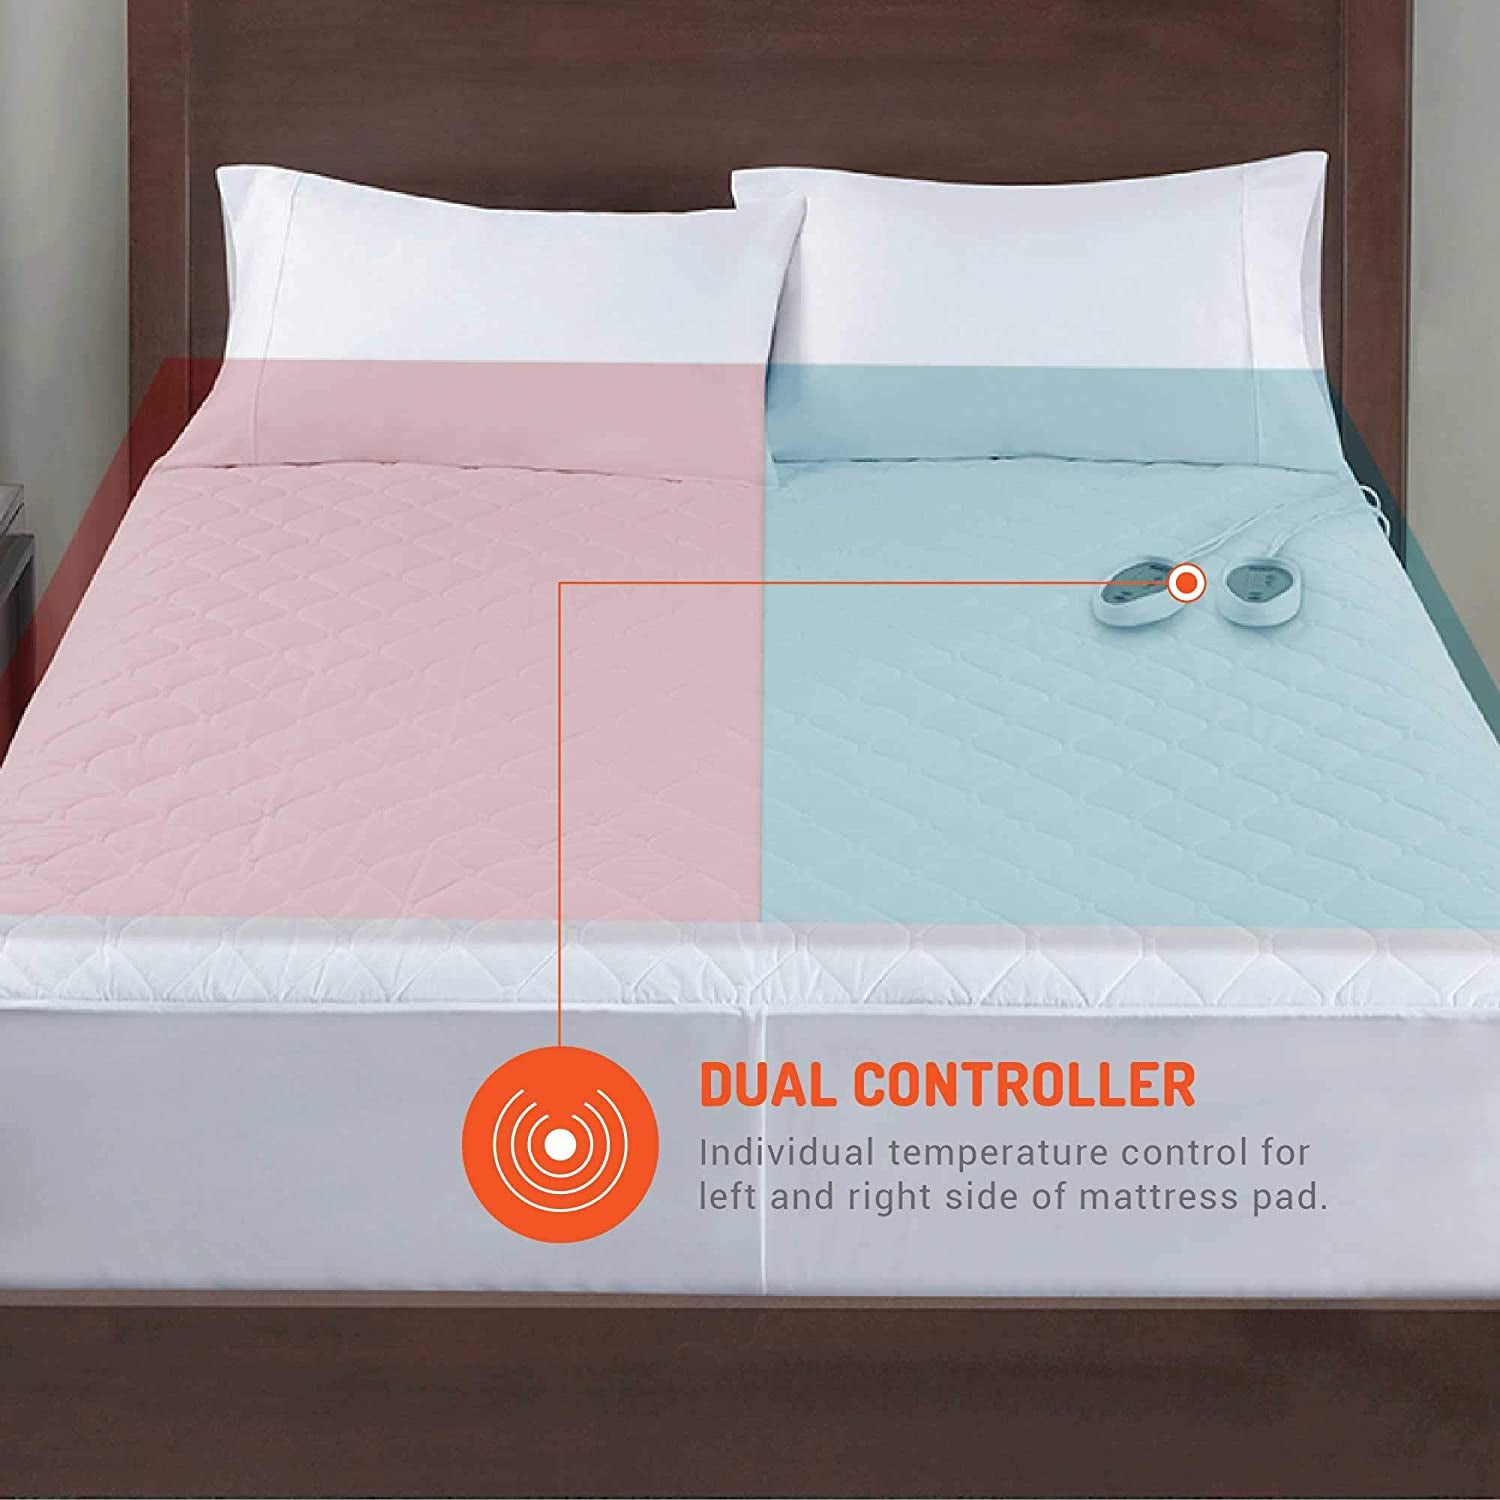 Degrees of Comfort Dual Control Heated Mattress Pad Queen Size | Zone Heating Electric Bed Warmer W/ Auto Shut off | Fit up to 15 Inch | 12.5Ft Long Cord - 60X80 Inch, White